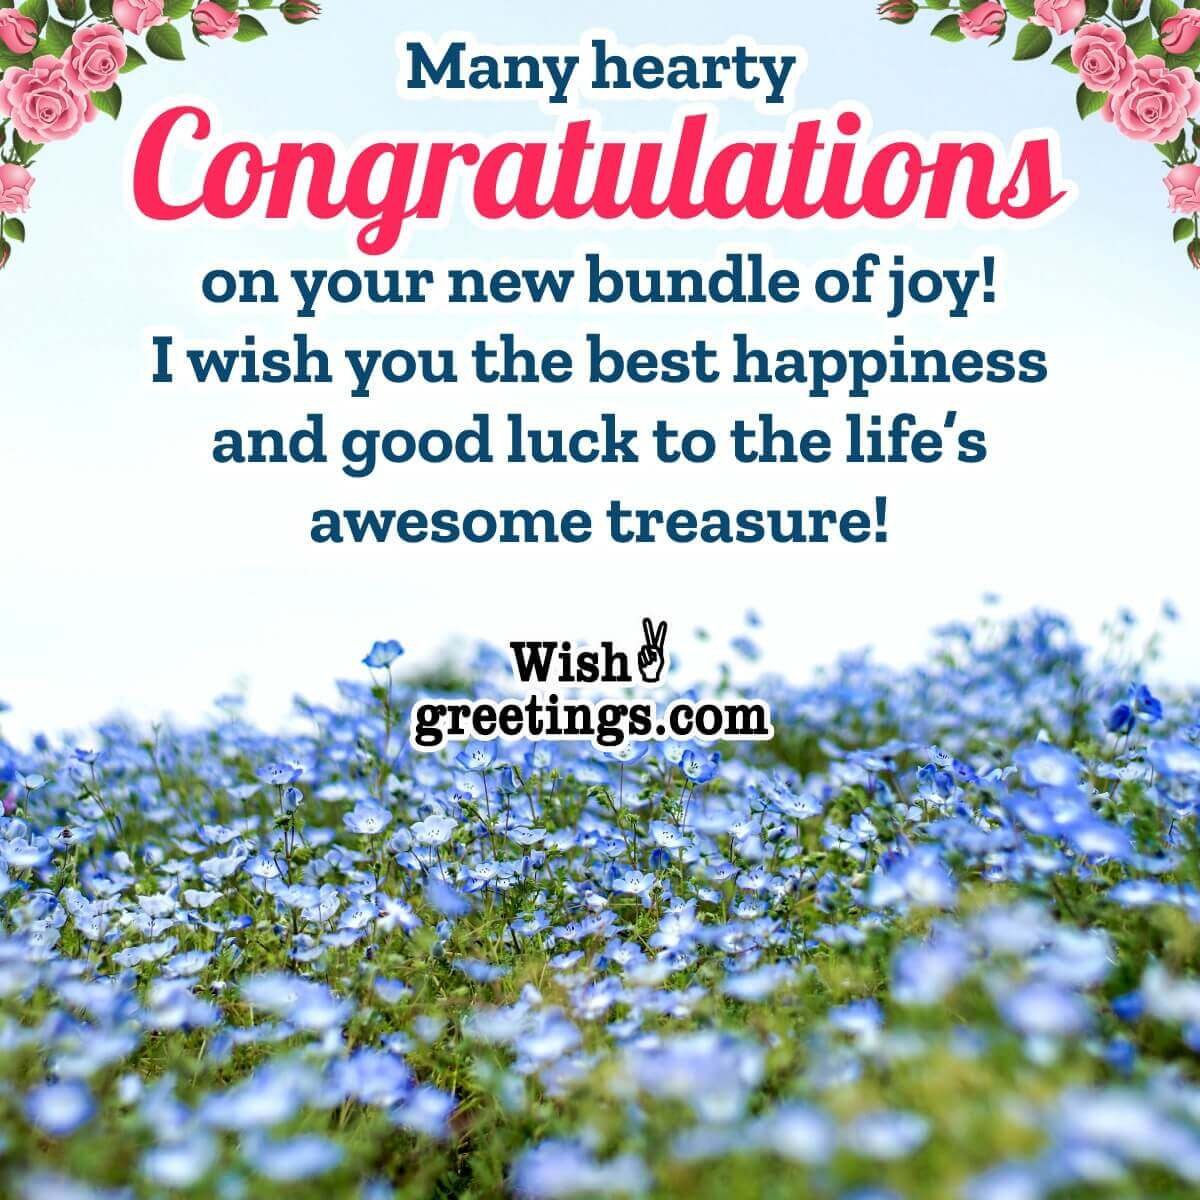 Wish Image For Congratulating On Having A Baby